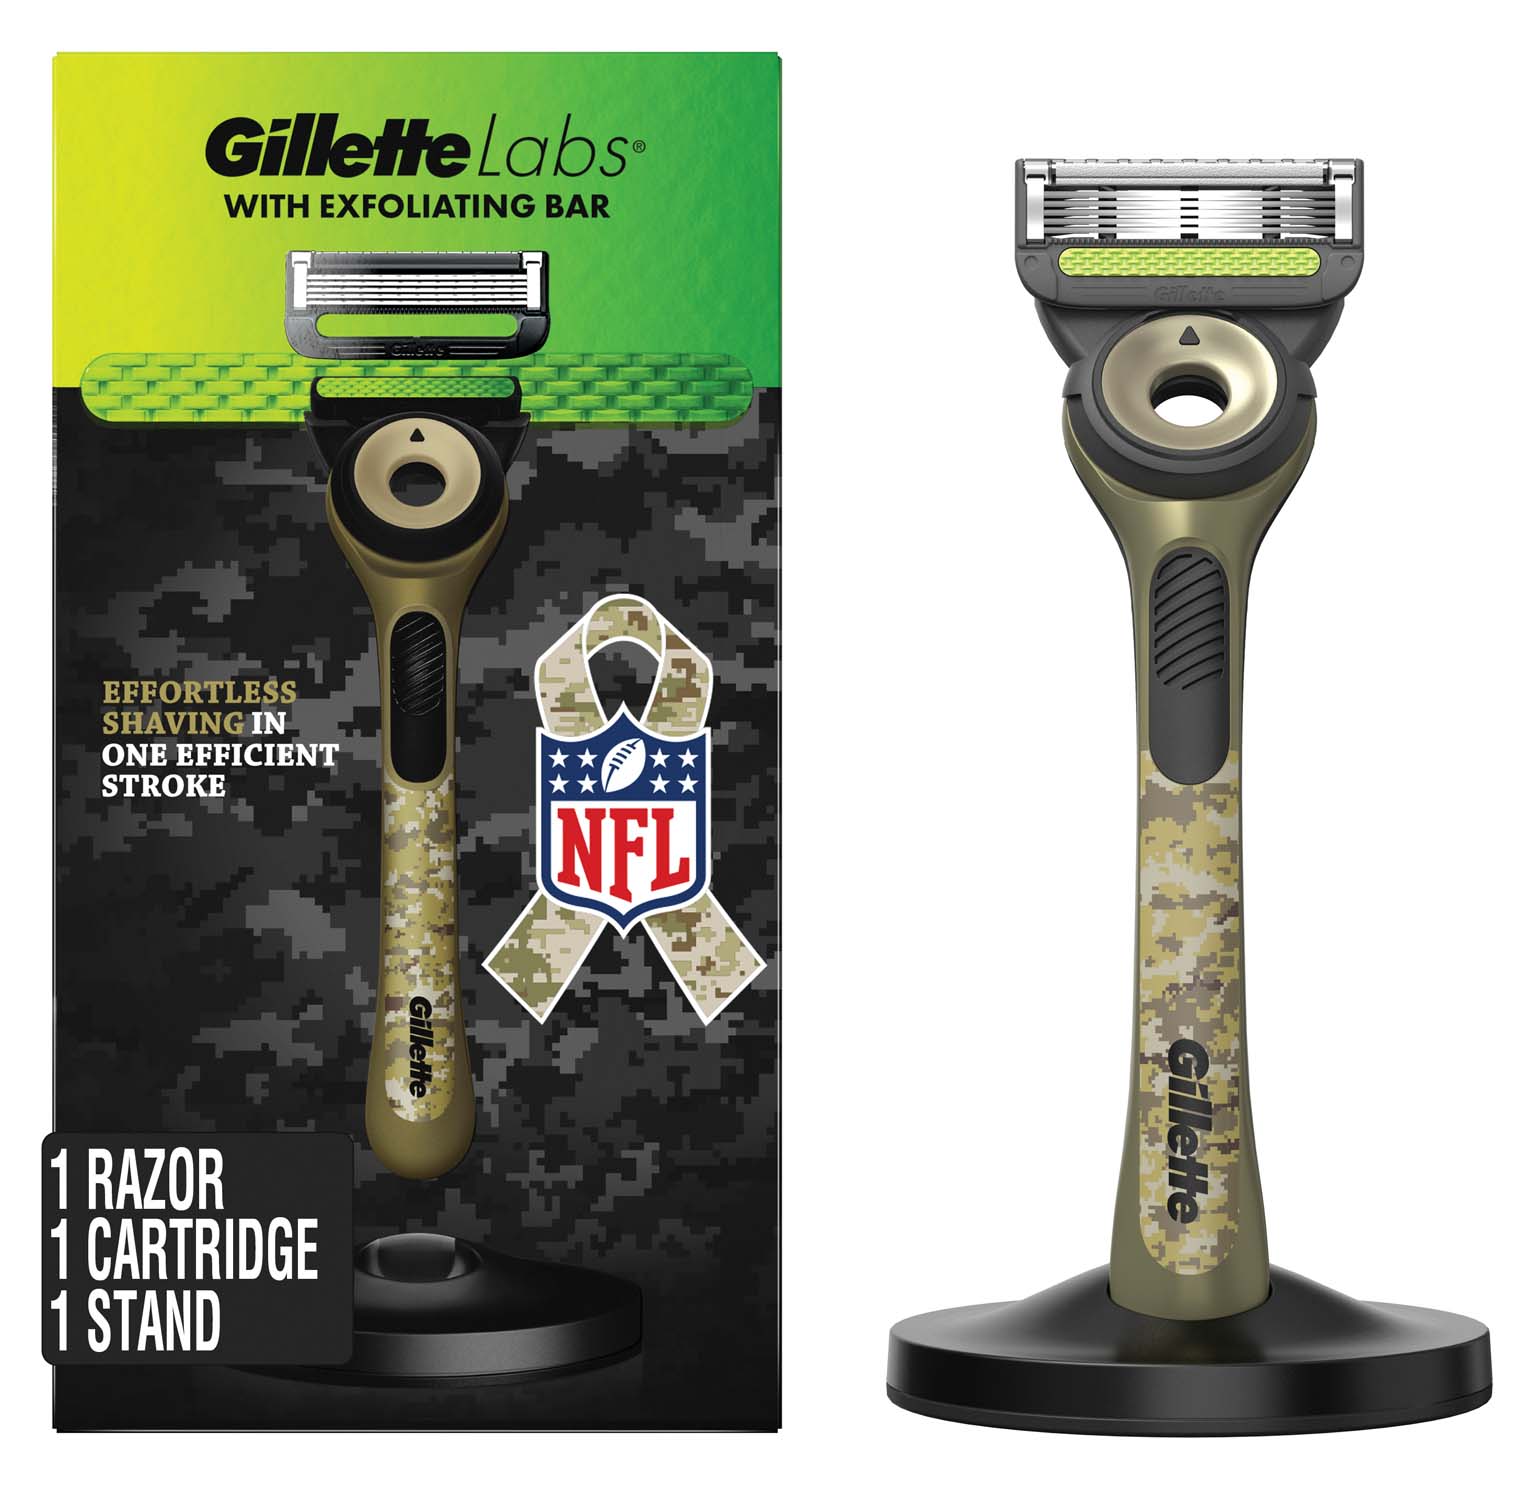 Gillette Honors Service Members With New GilletteLabs Razor